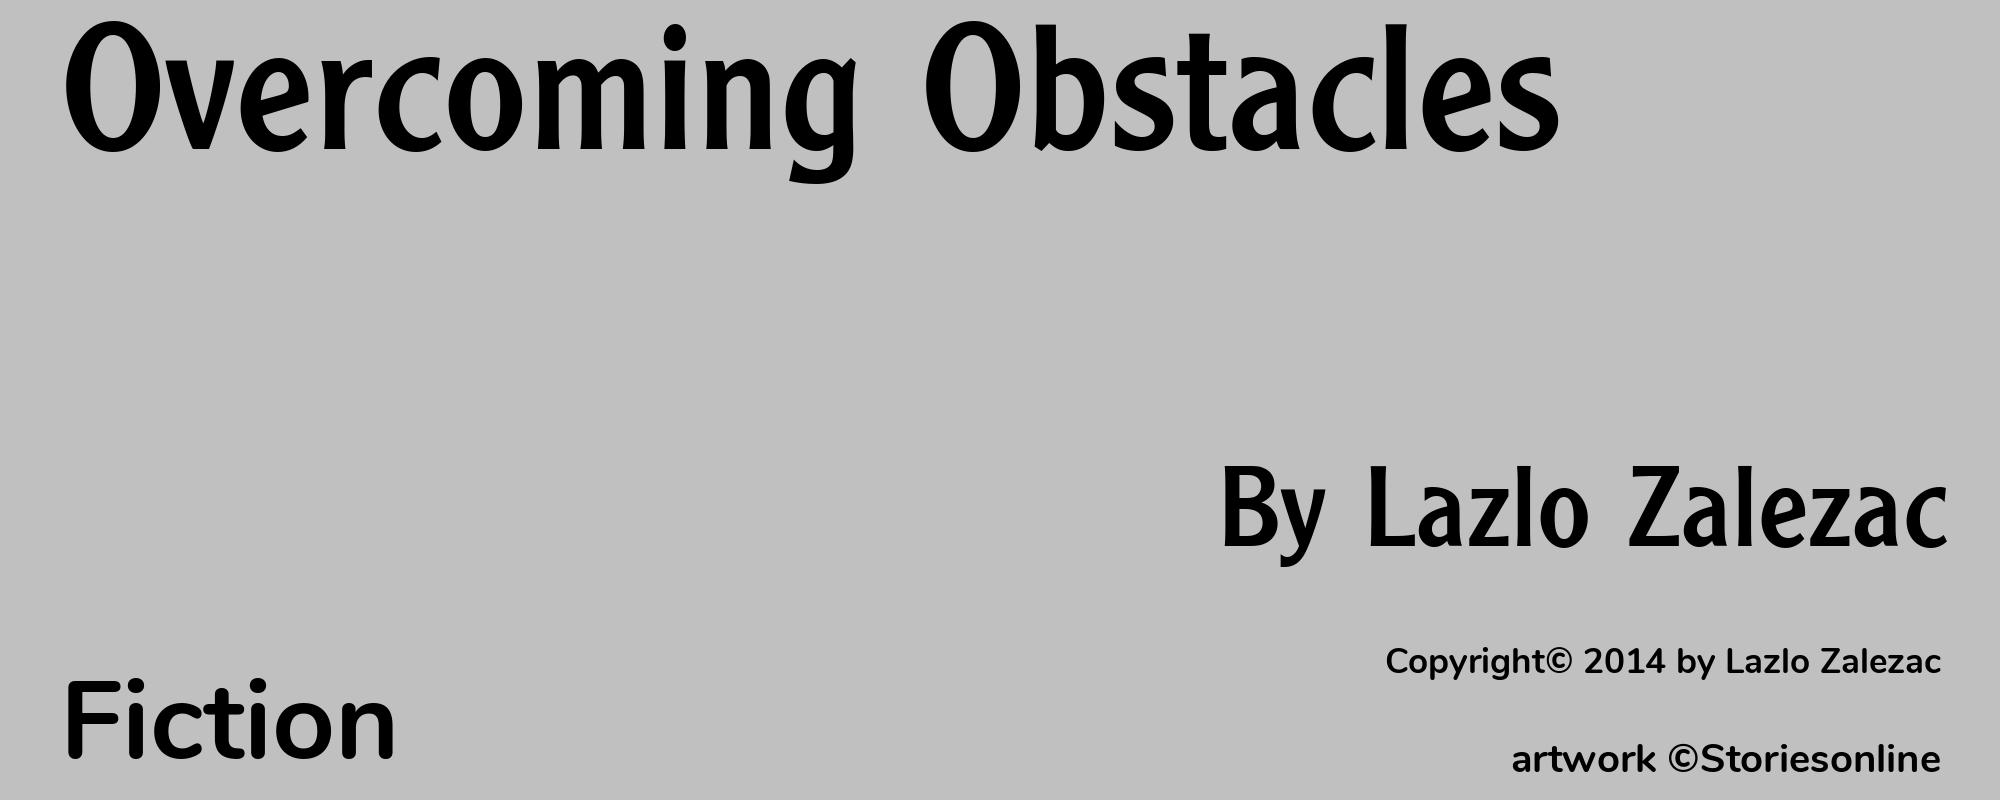 Overcoming Obstacles - Cover